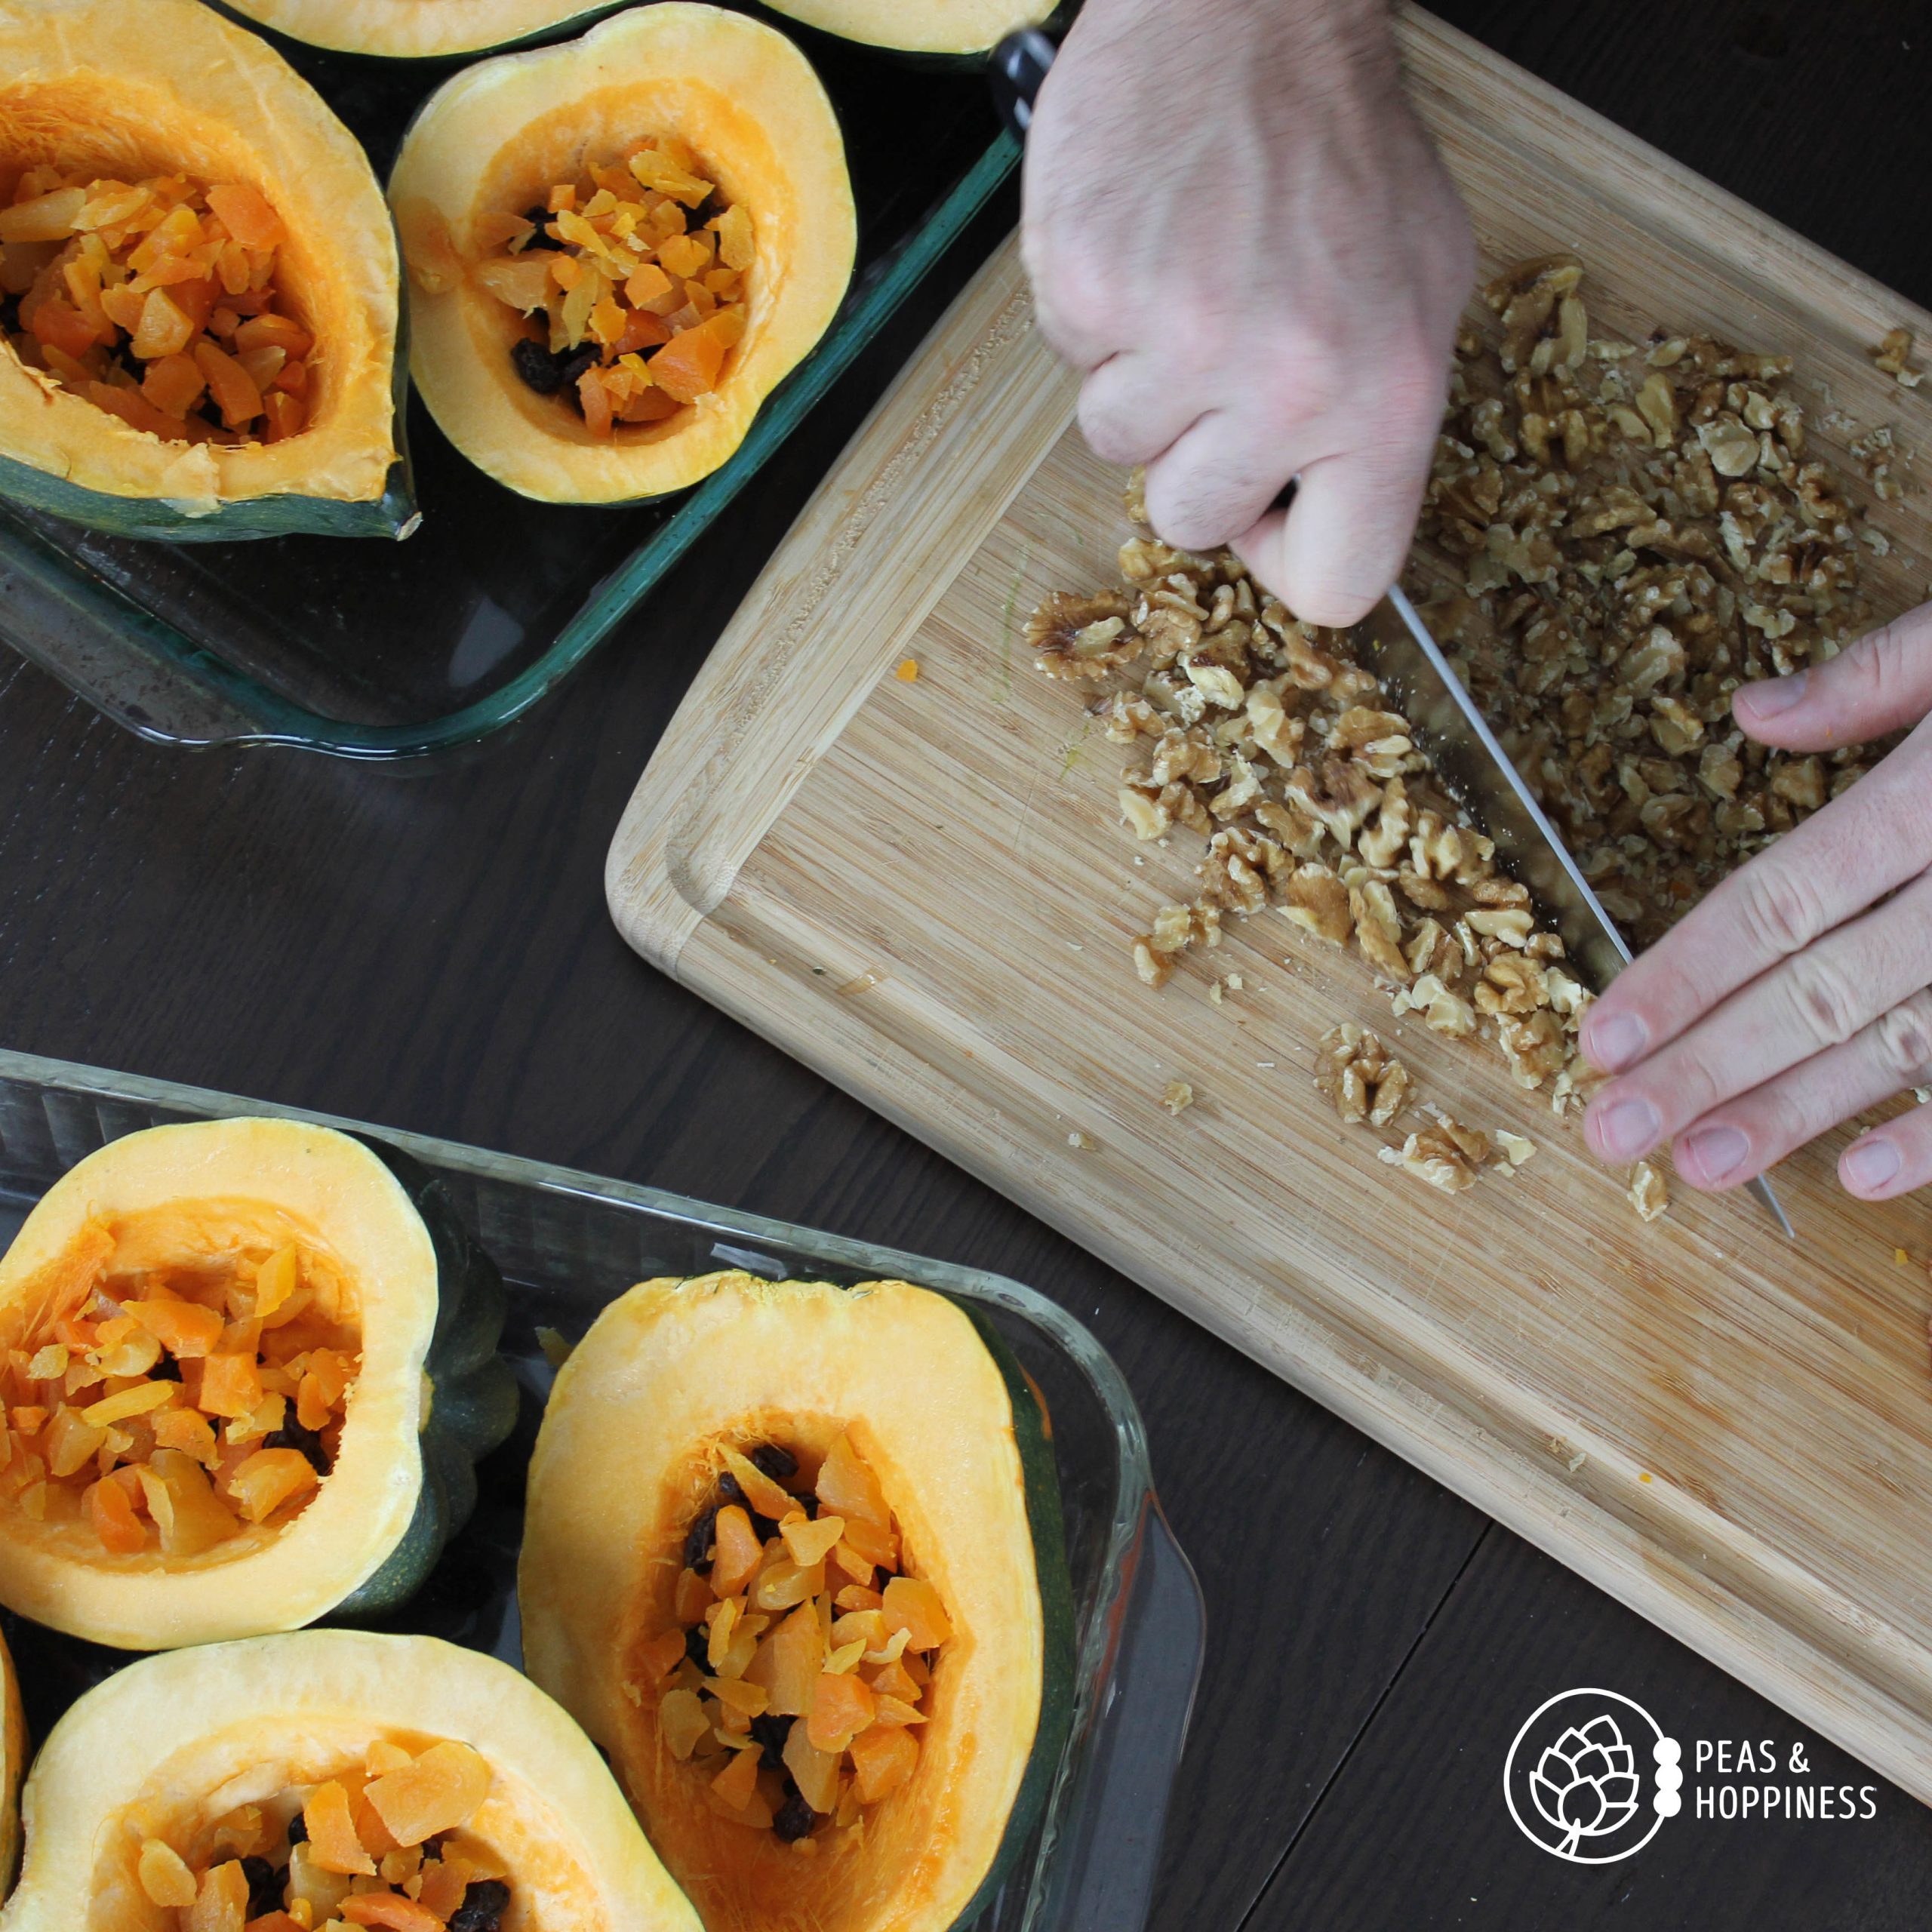 Chopping Walnuts and Pecans for Acorn Squash Stuffed with Dried Fruits and Nuts - Dairy Free Gluten Free Vegan Holiday Recipe from Peas and Hoppiness